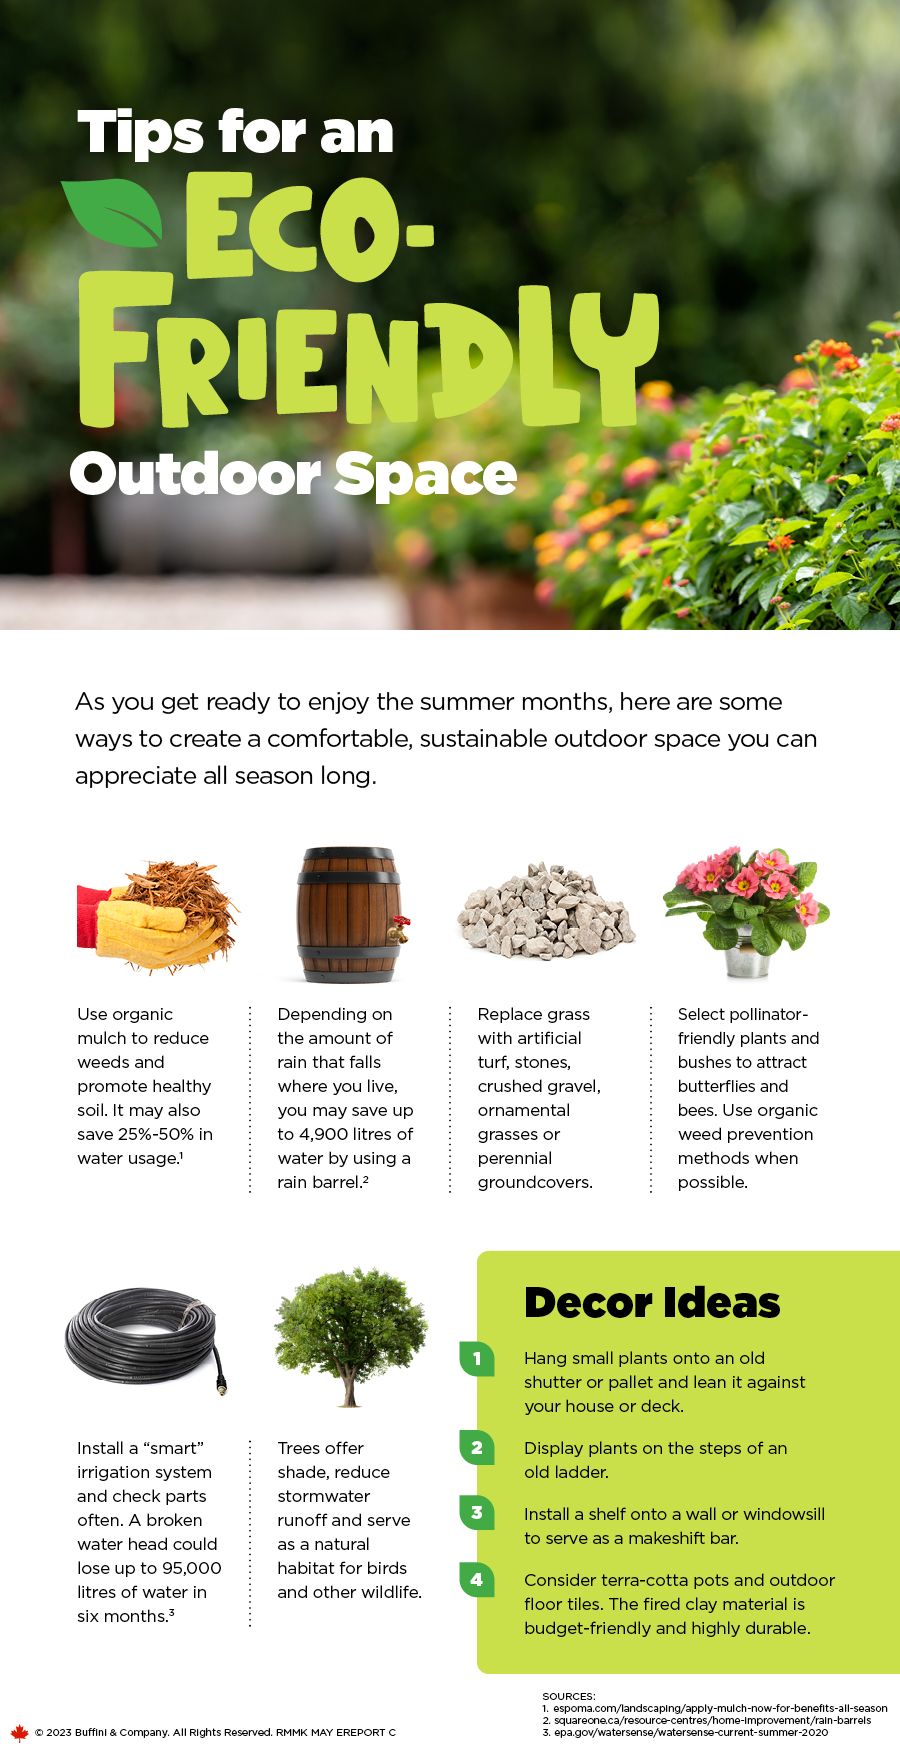 Tips For A Eco-Friendly Outdoor Space